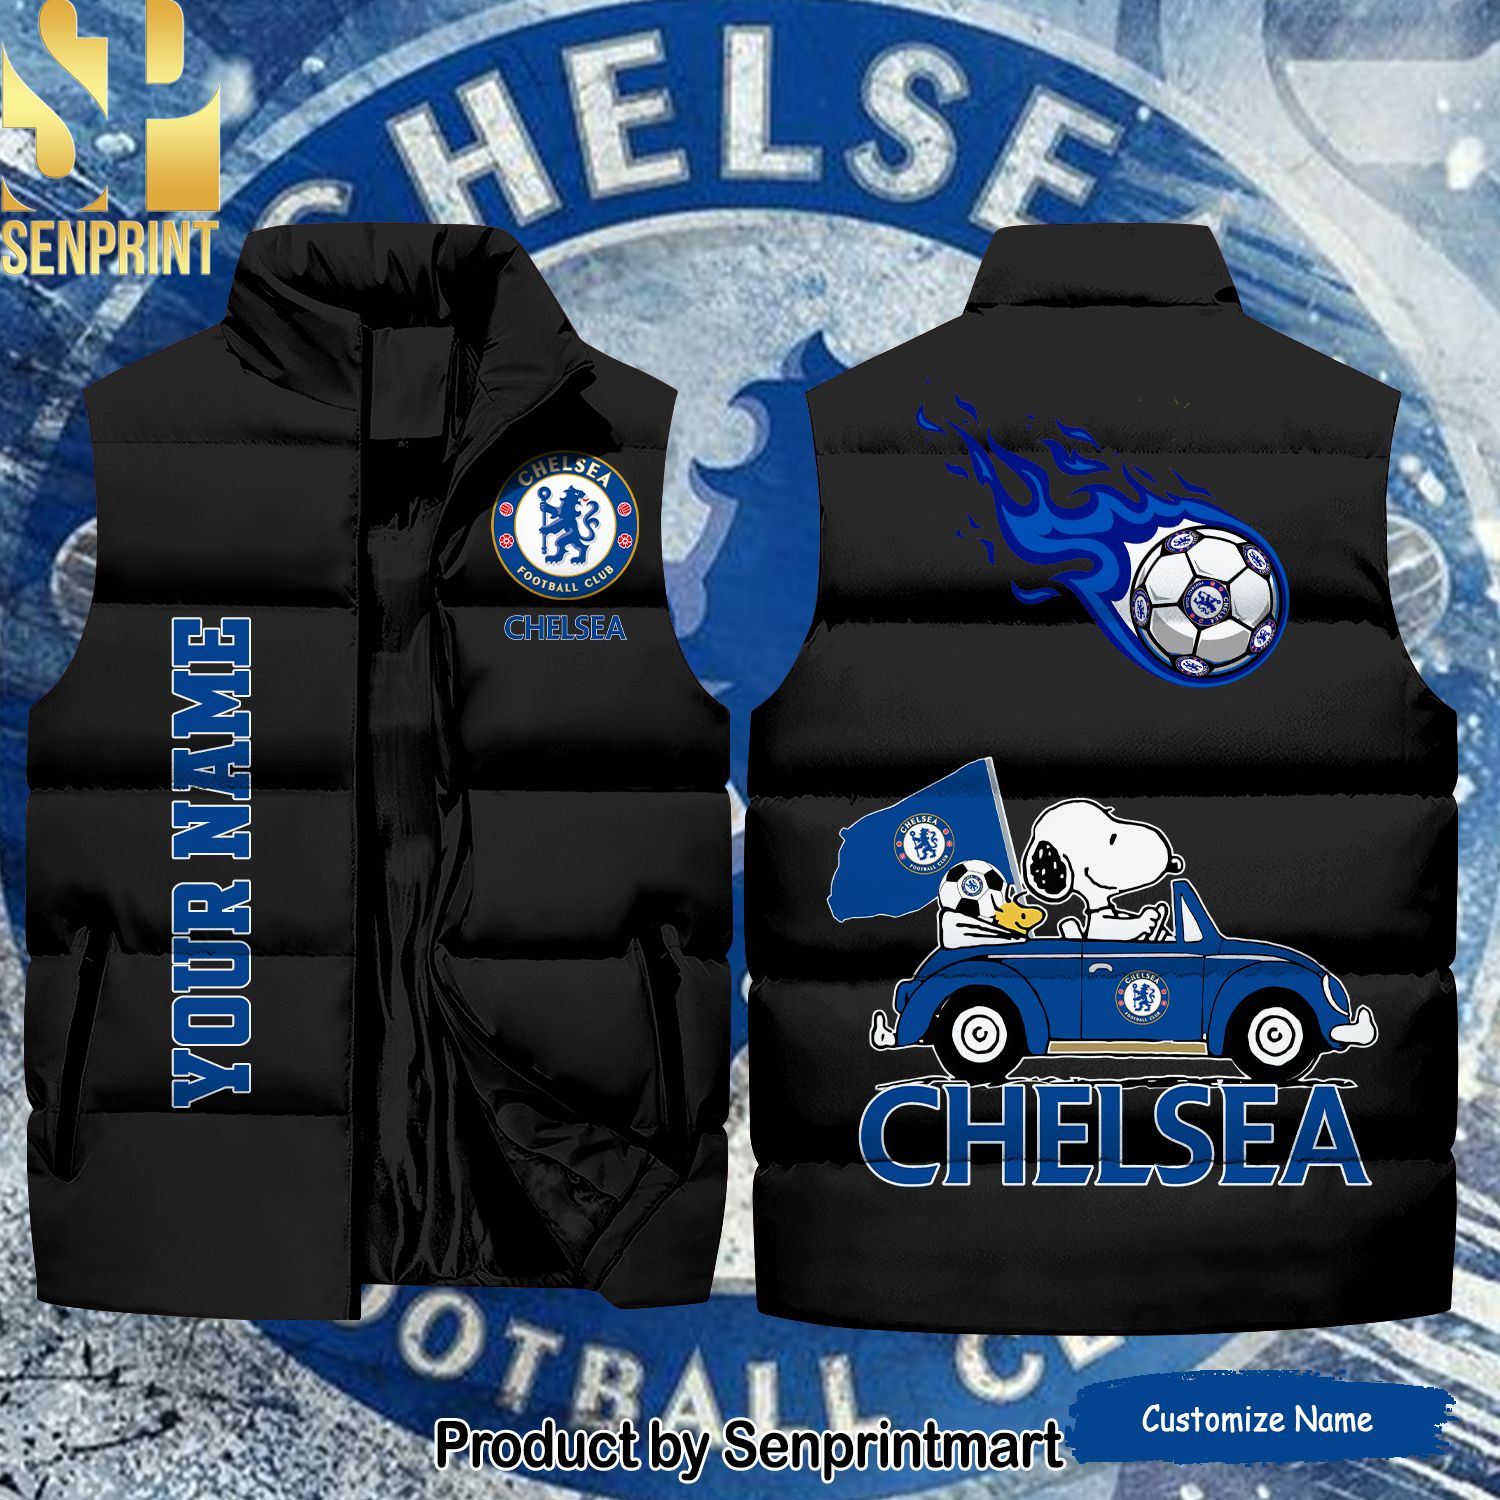 English Premier League Chelsea Snoopy Name For Fans Sleeveless Jacket